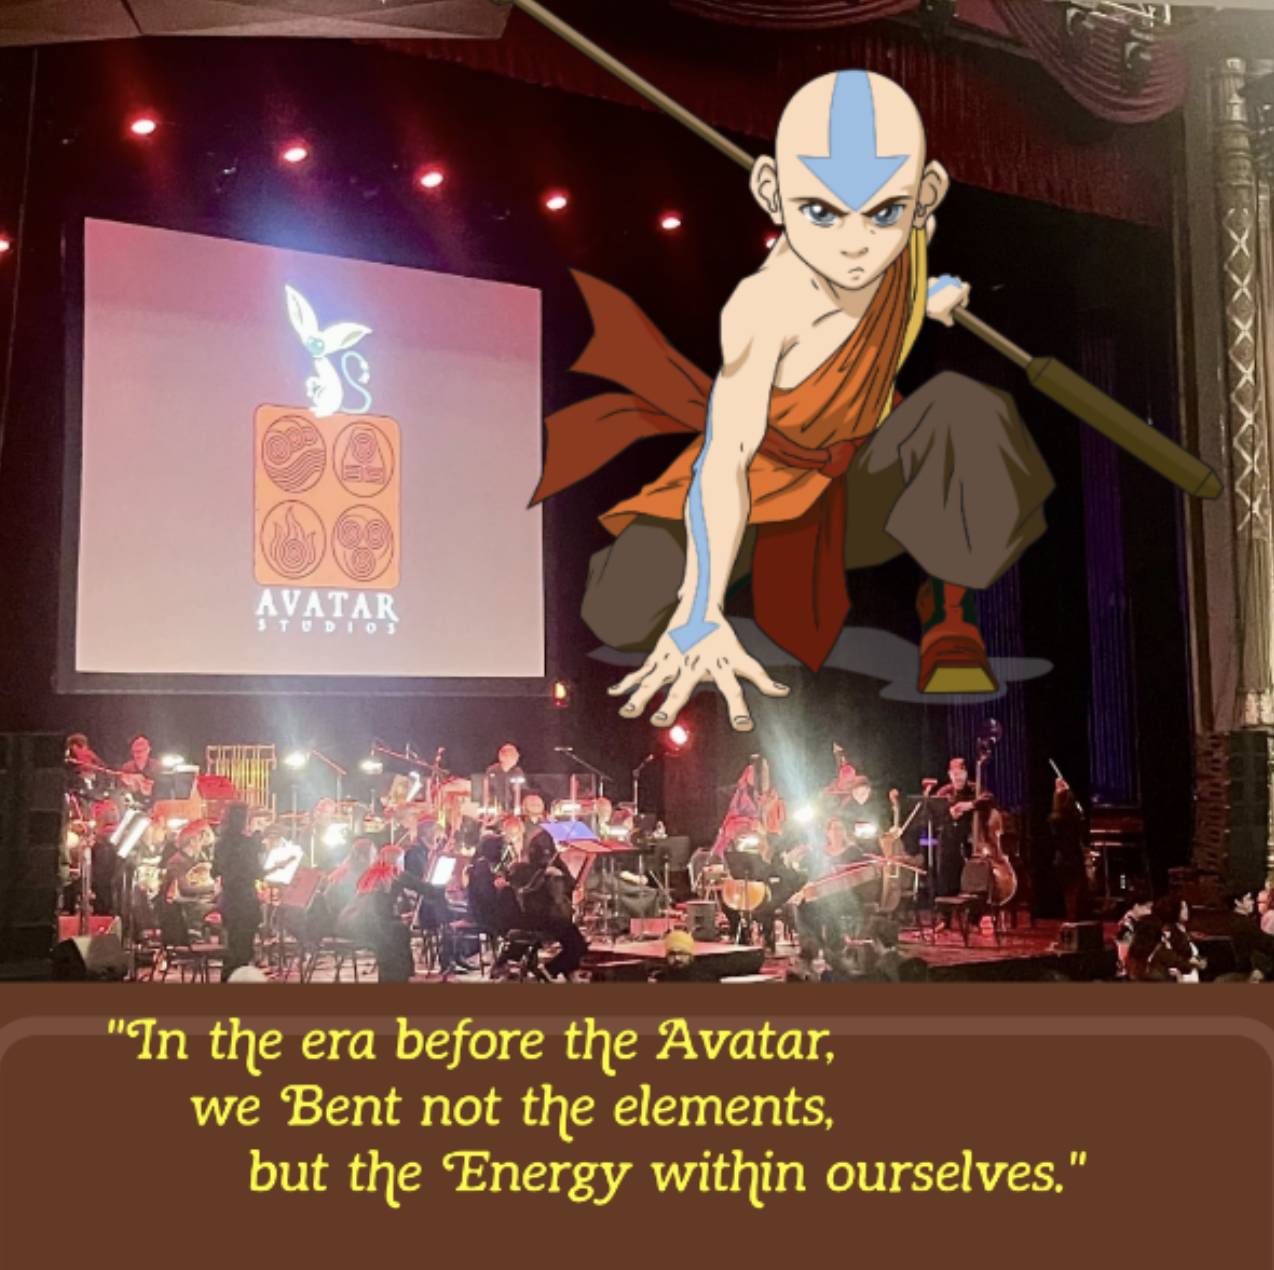 Crafting Your Destiny in a Post-Covid Era - Lessons from Avatar: The Last Airbender